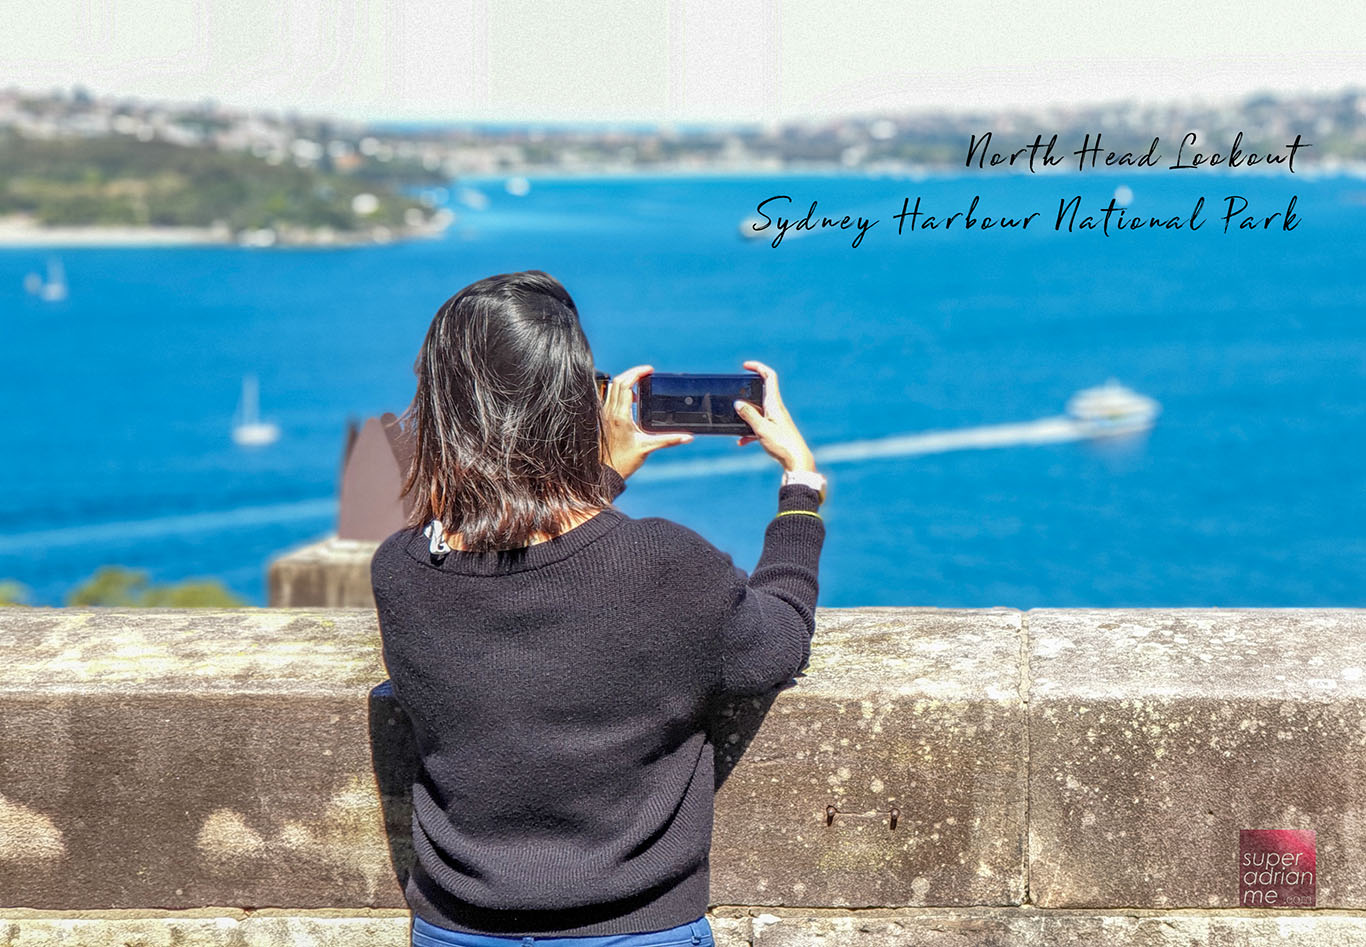 Samsung Galaxy Note 9 Photography at North Head Lookout from Sydney Harbour National Park in Manly, Sydney